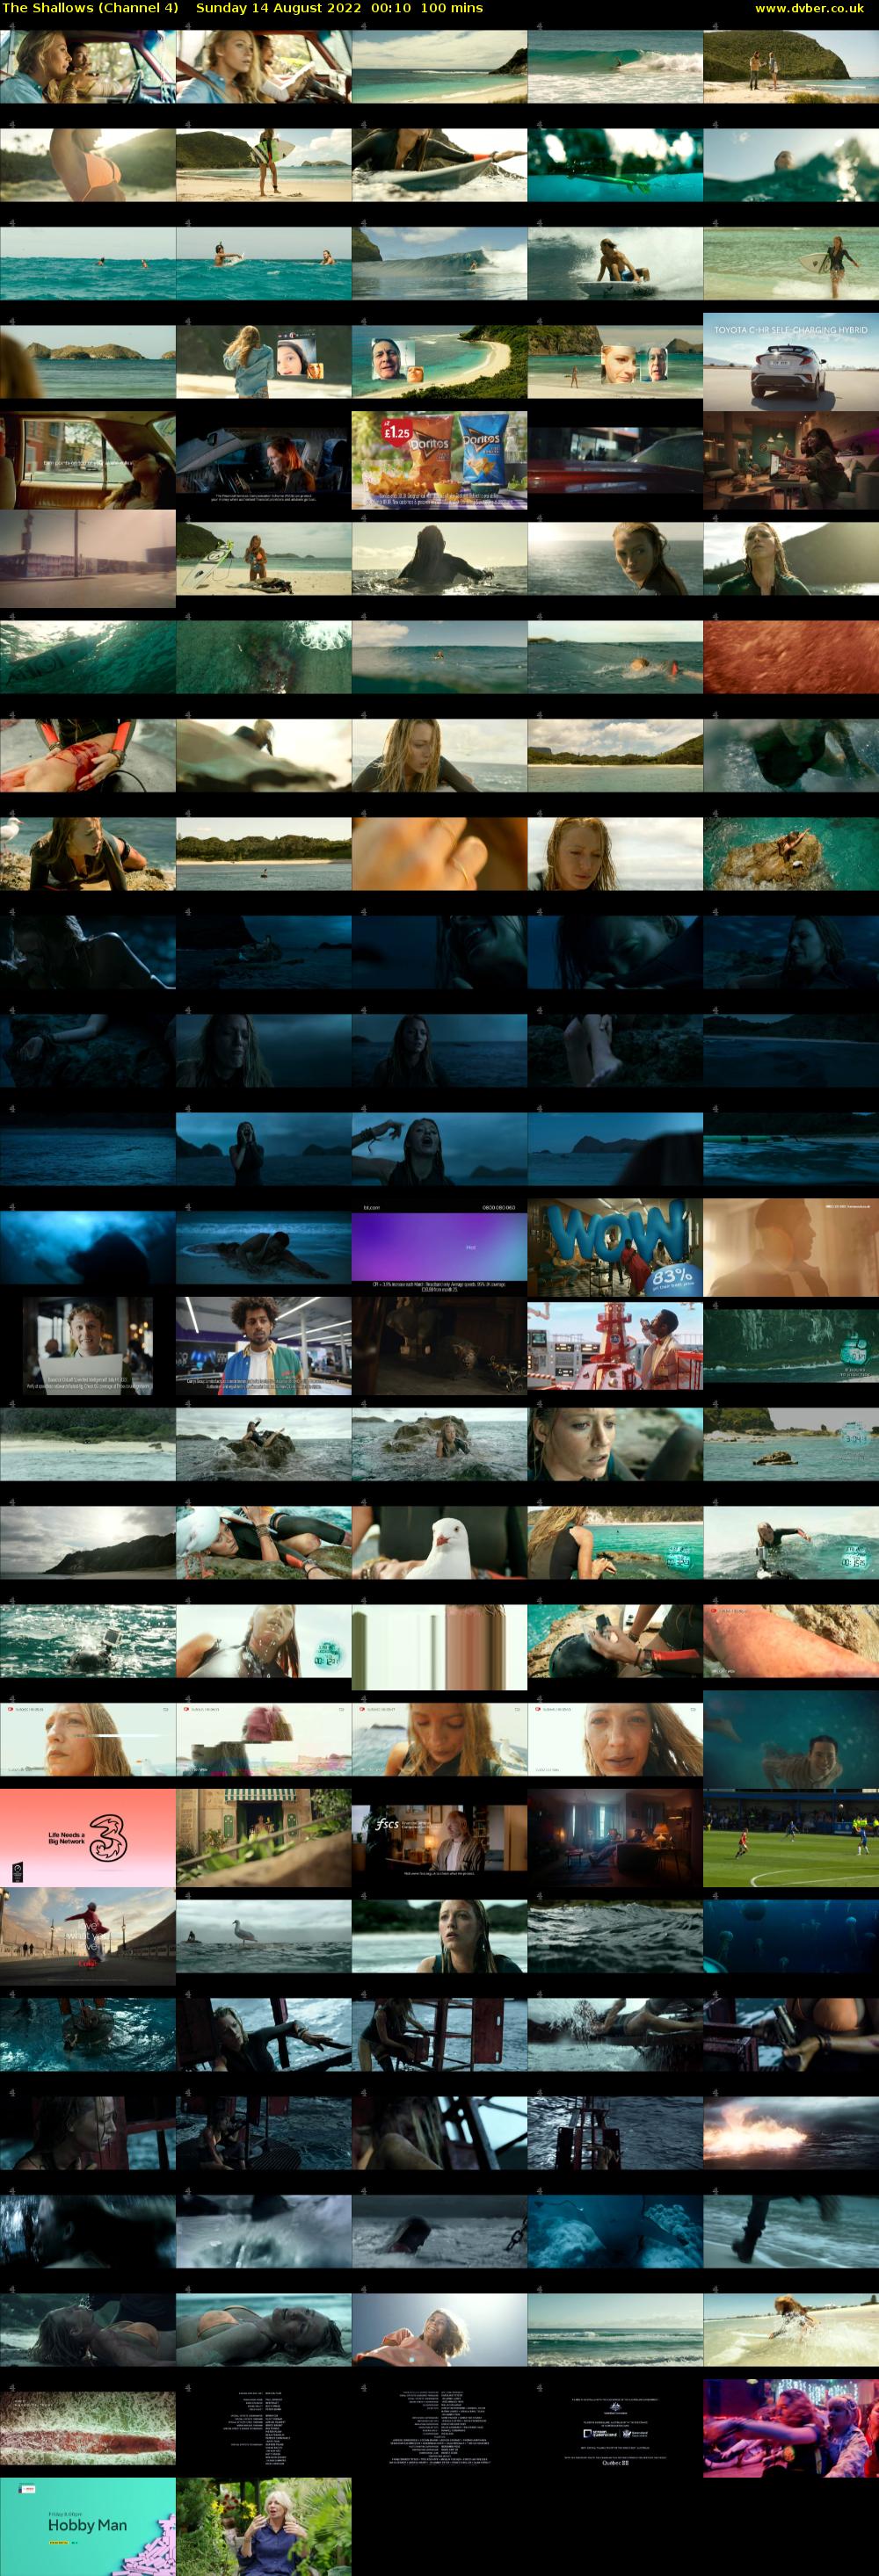 The Shallows (Channel 4) Sunday 14 August 2022 00:10 - 01:50